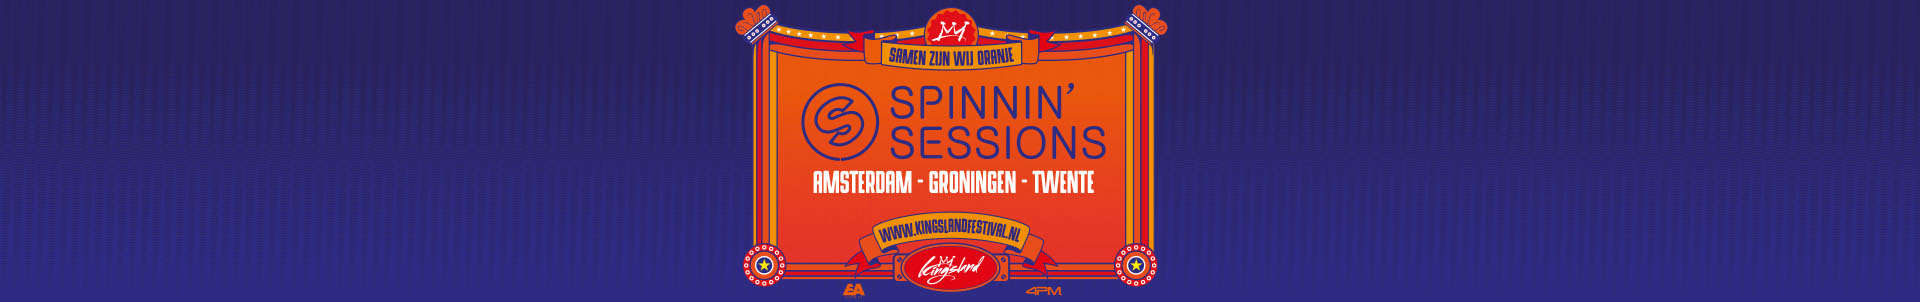 Watch Spinnin' Sessions Kingsland aftermovie